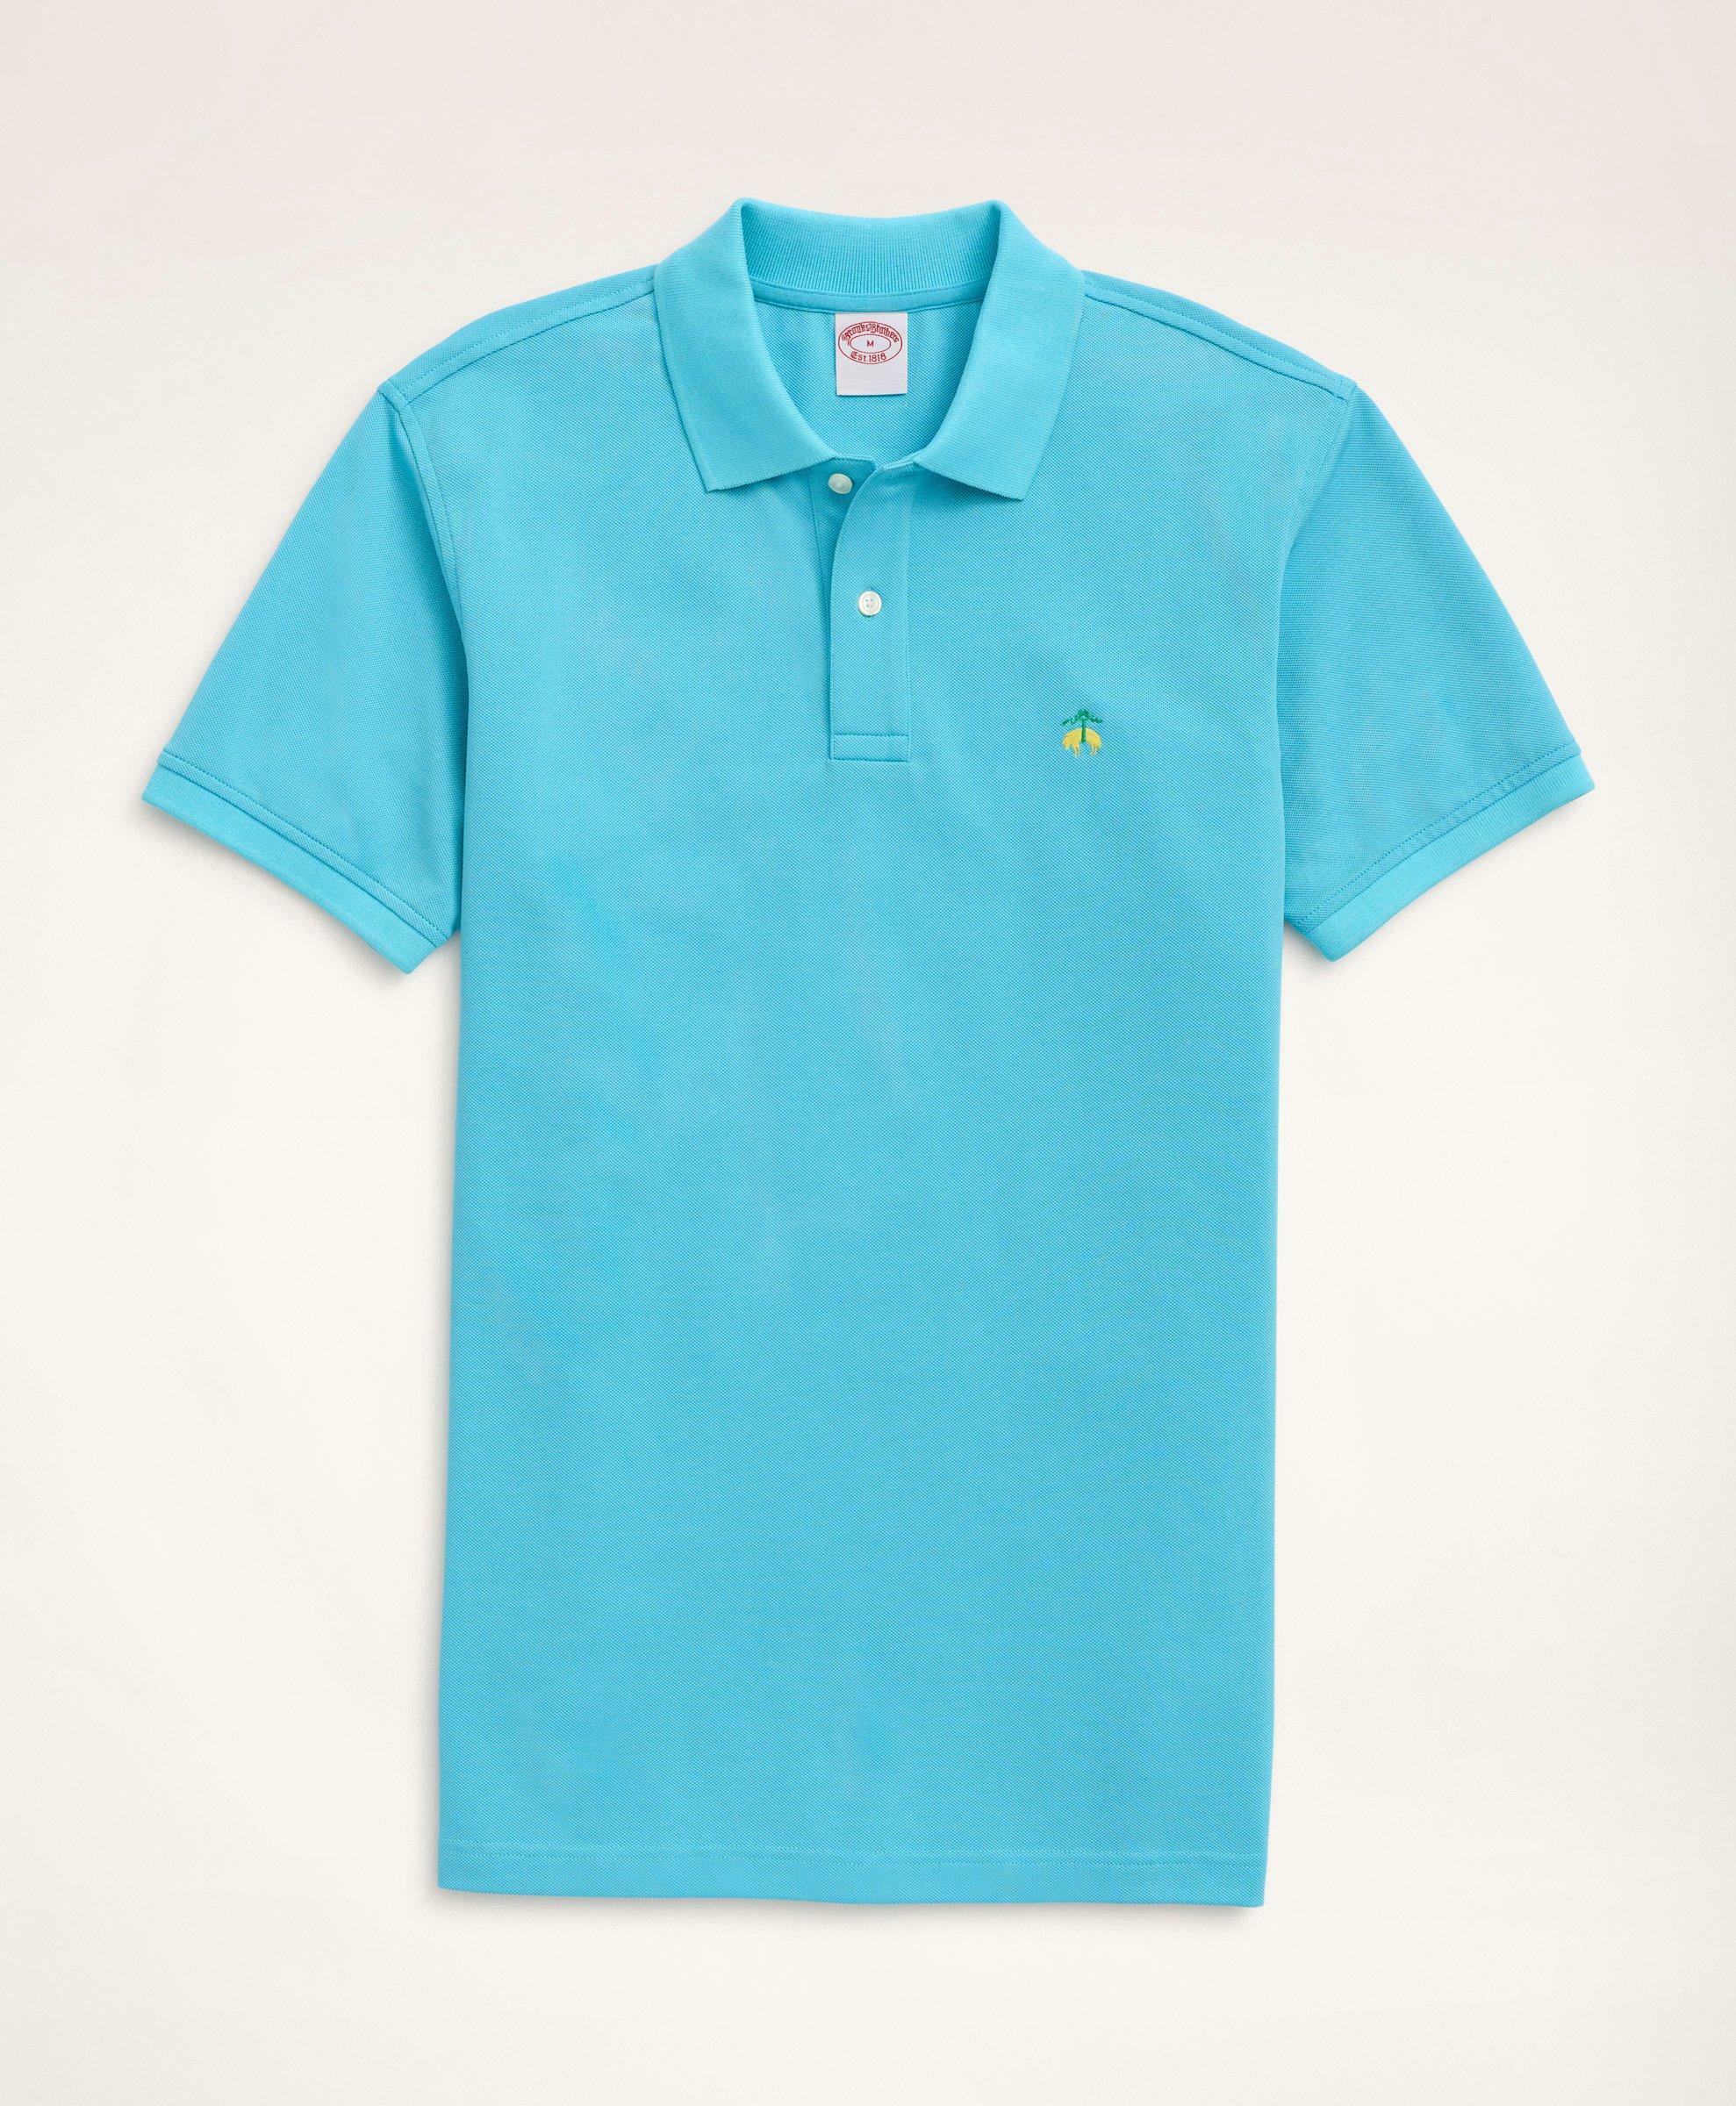 Brooks Brothers Men's Golden Fleece Original Fit Stretch Supima Polo Shirt | Turquoise